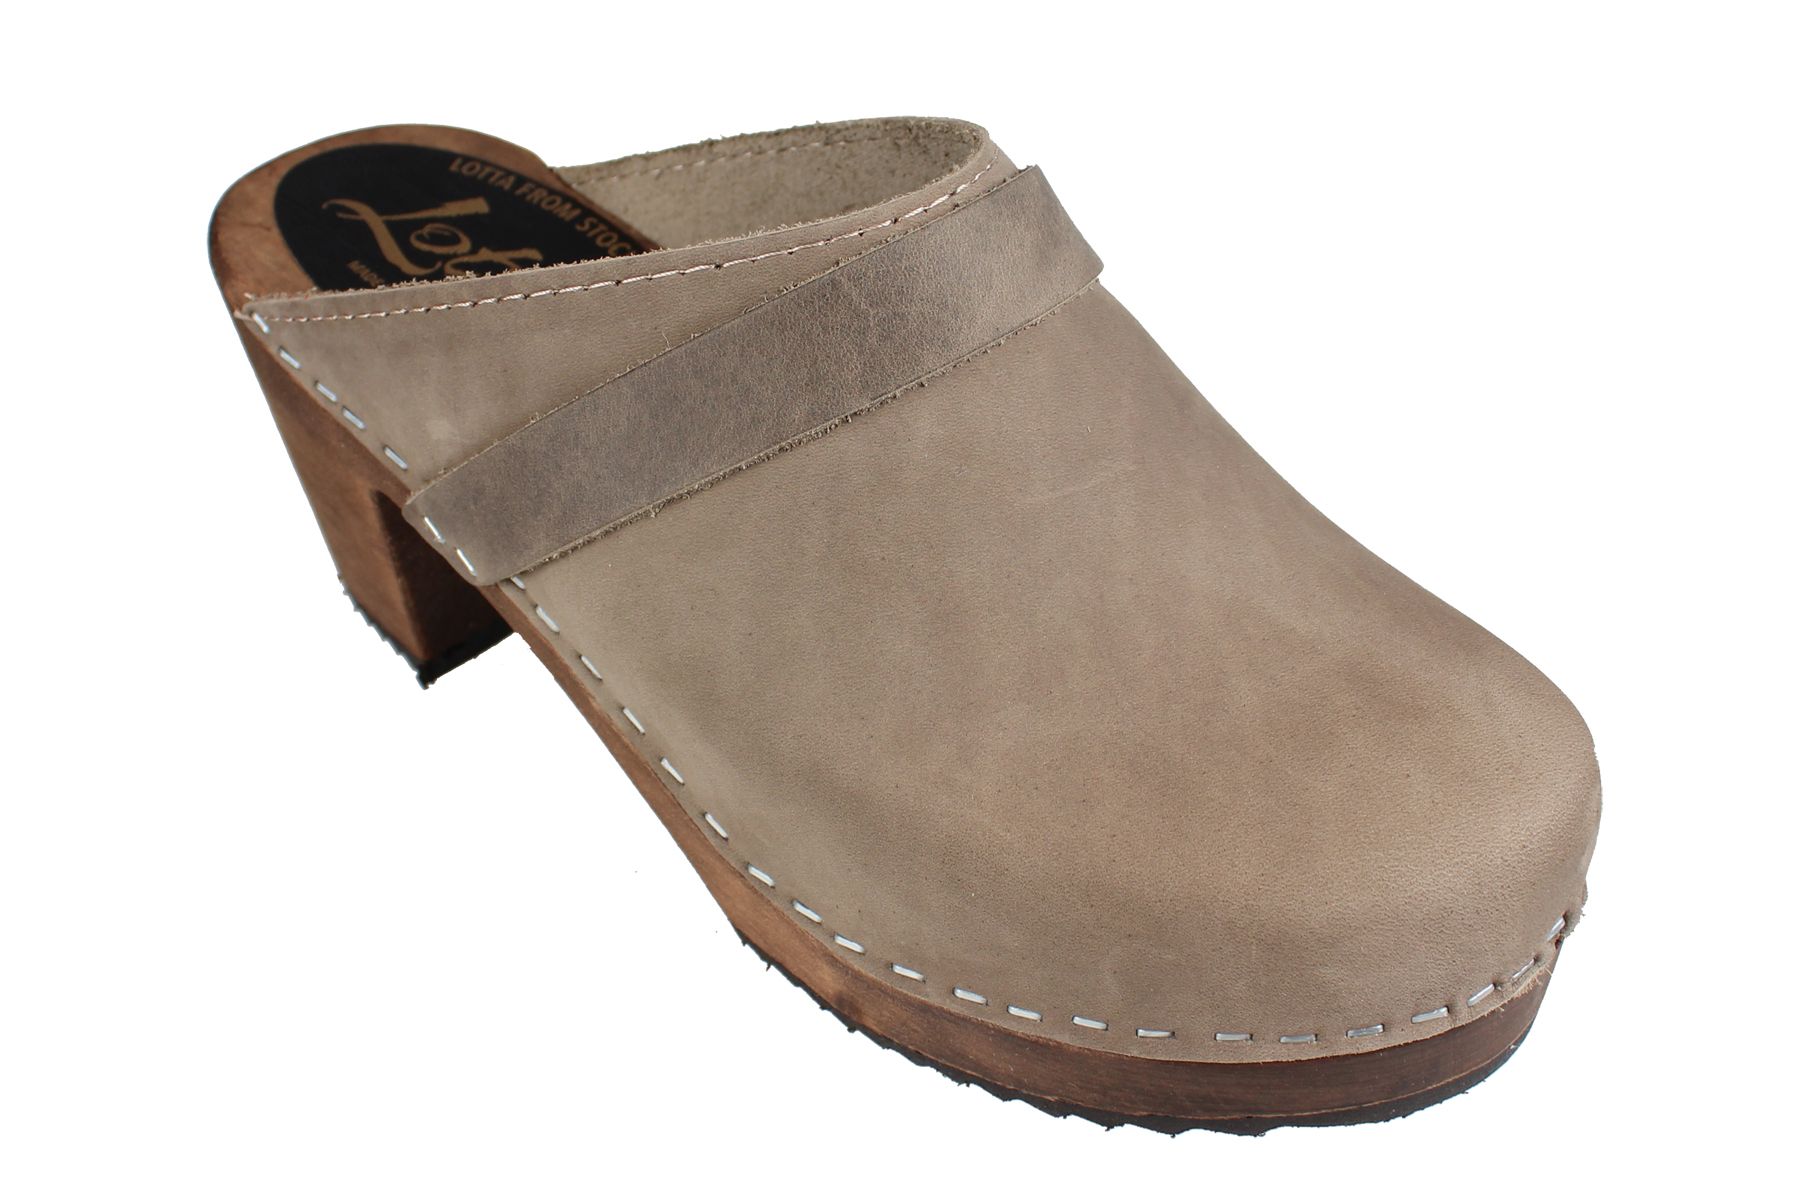  High Heel Classic Clog in Taupe Oiled Nubuck on Brown Base with Strap Seconds